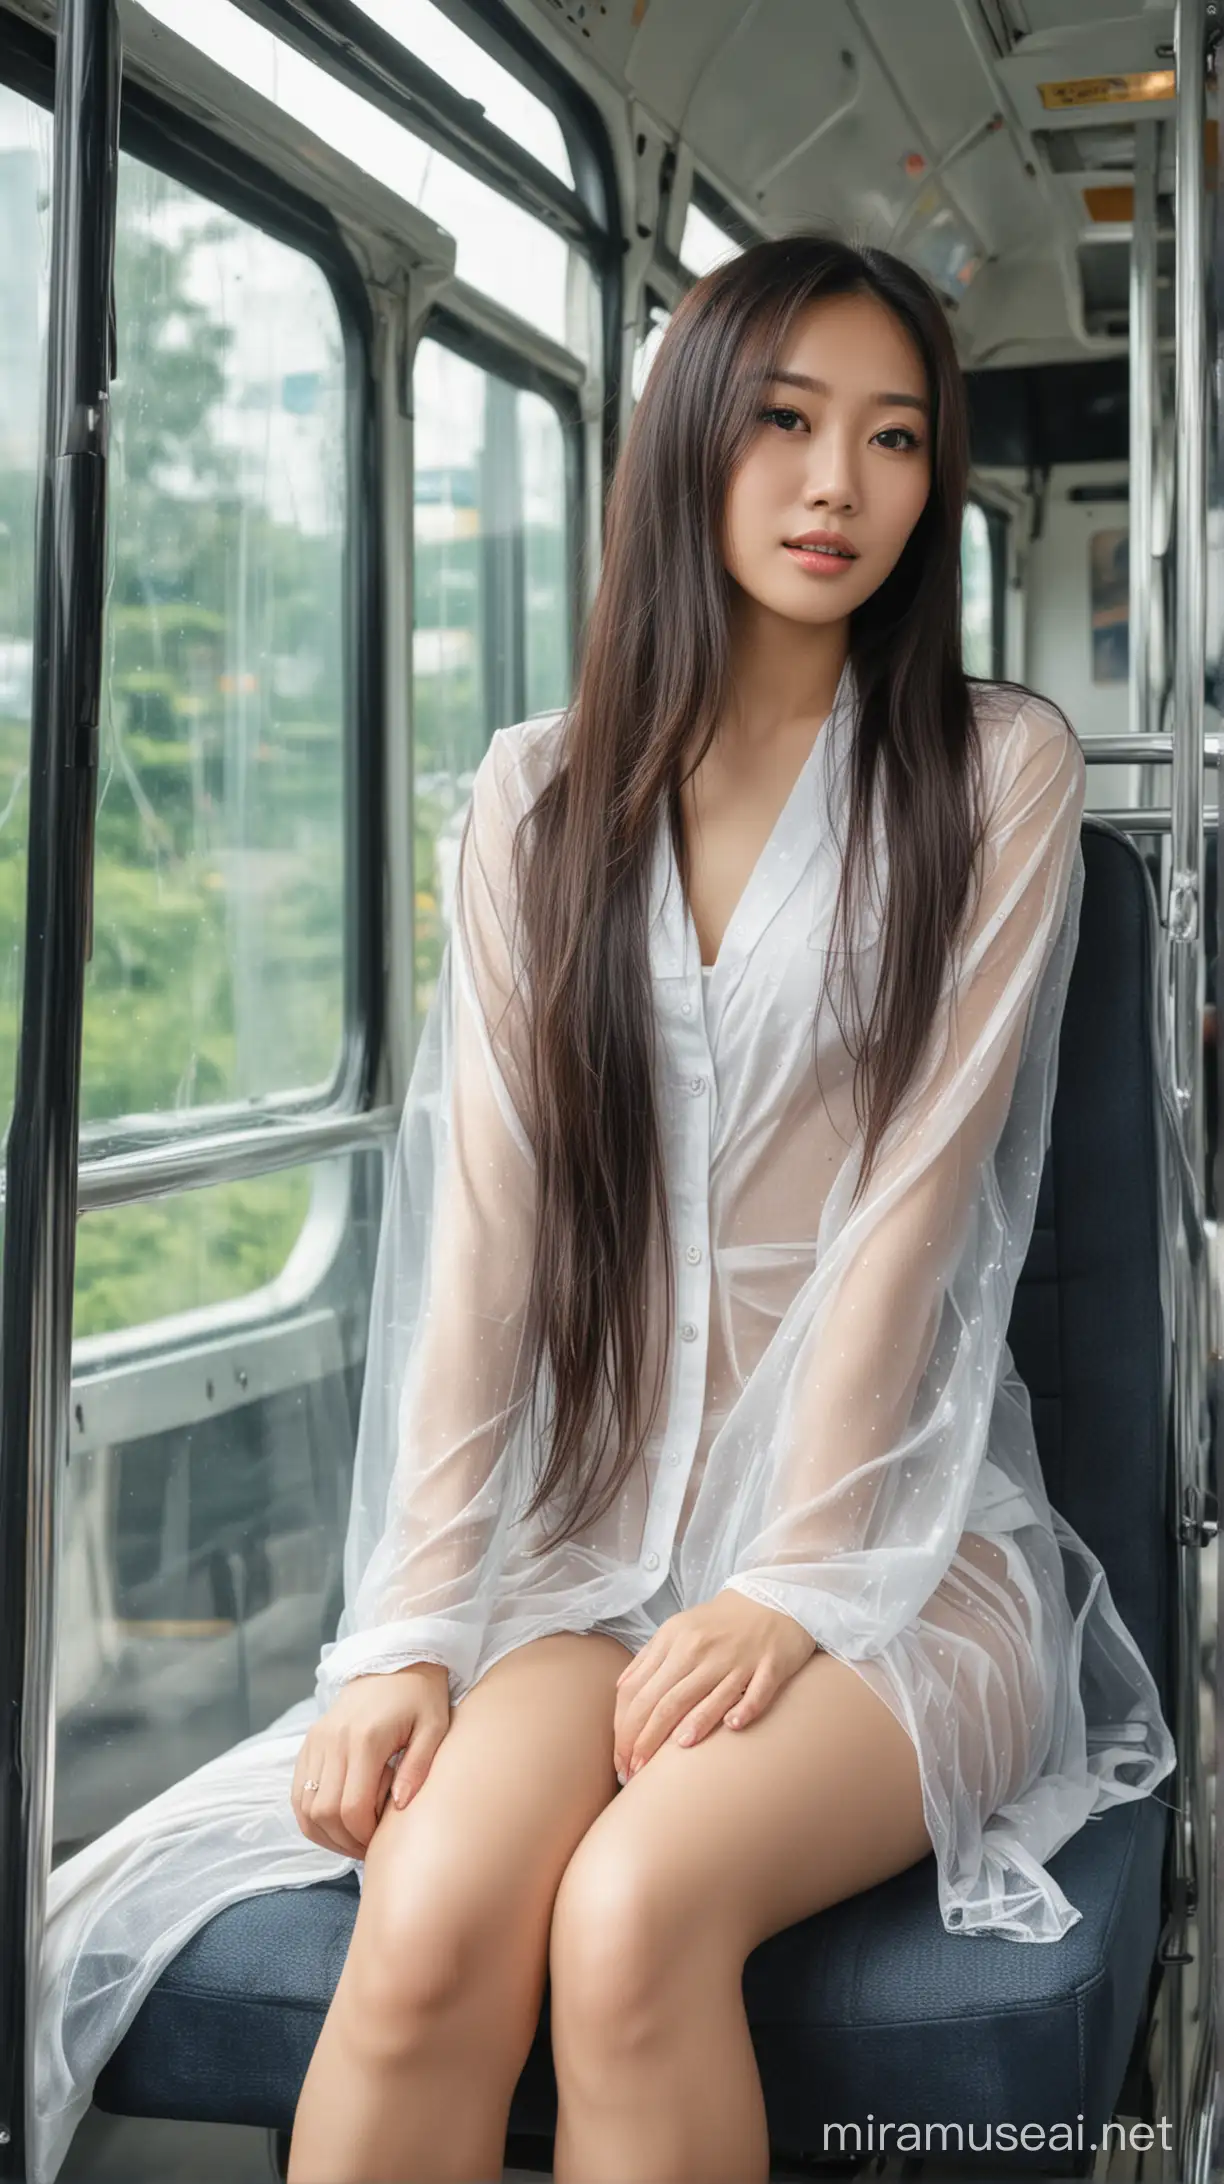 Elegant Asian Woman with Flowing Hair in Morning Sunlight on Bus